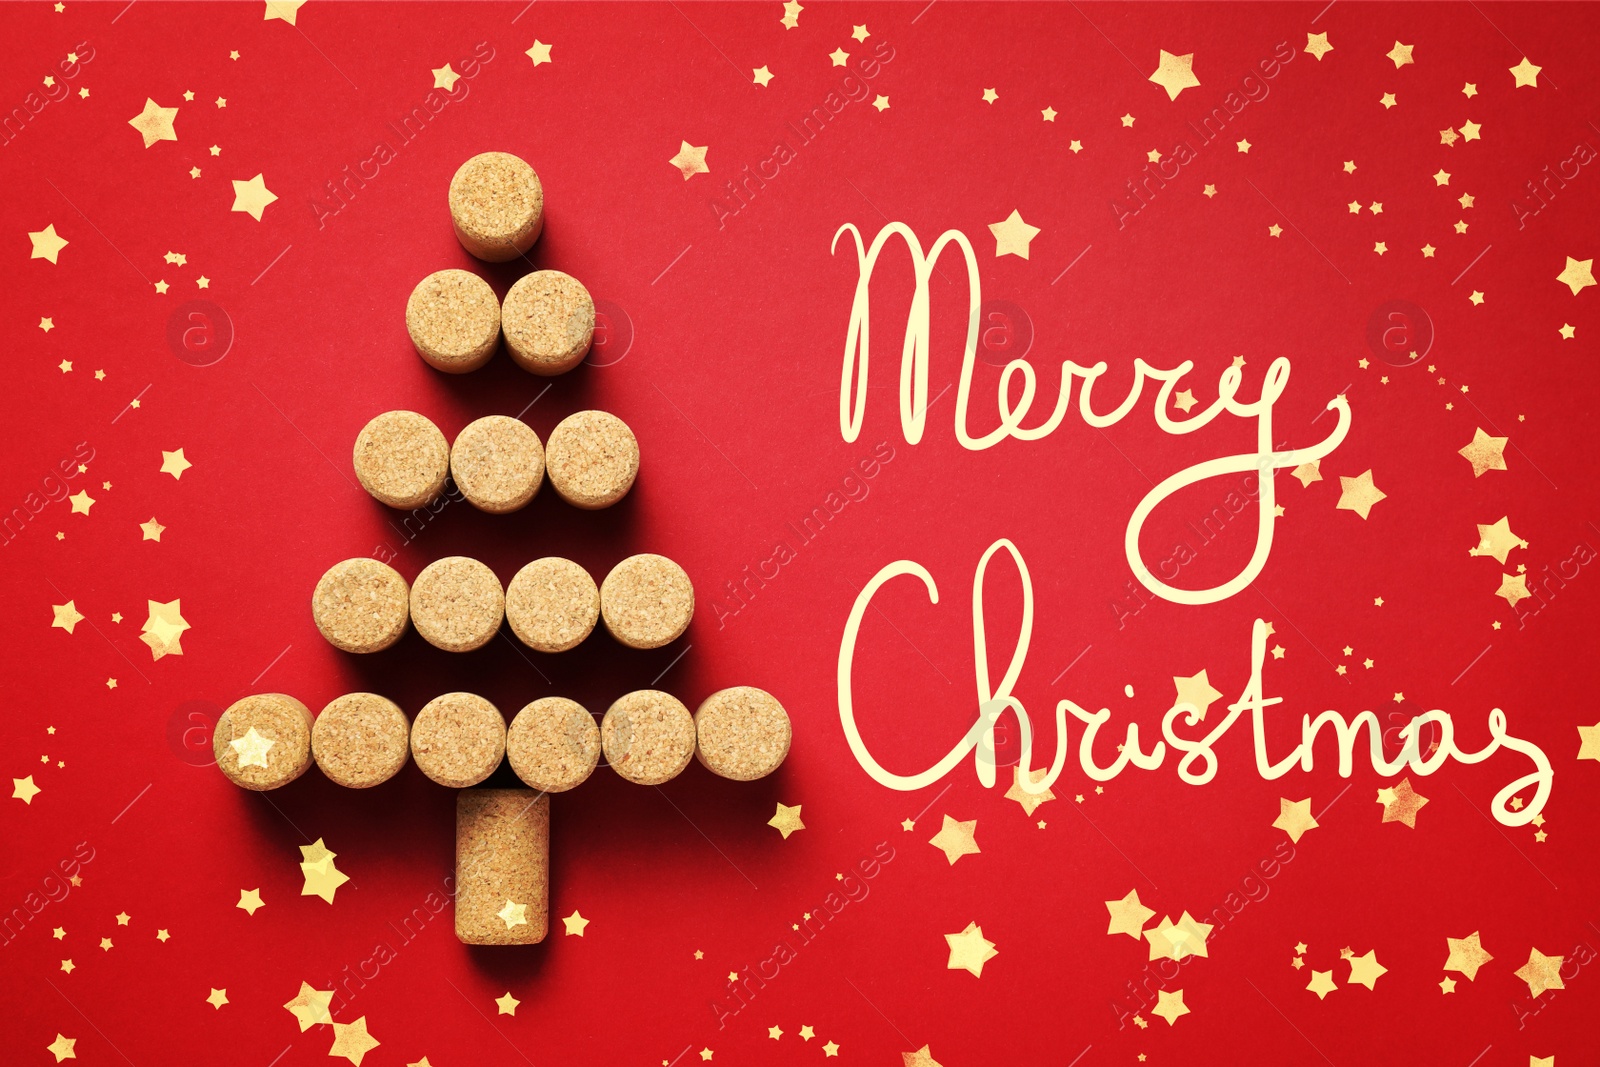 Image of Christmas tree made of wine corks on red background, top view